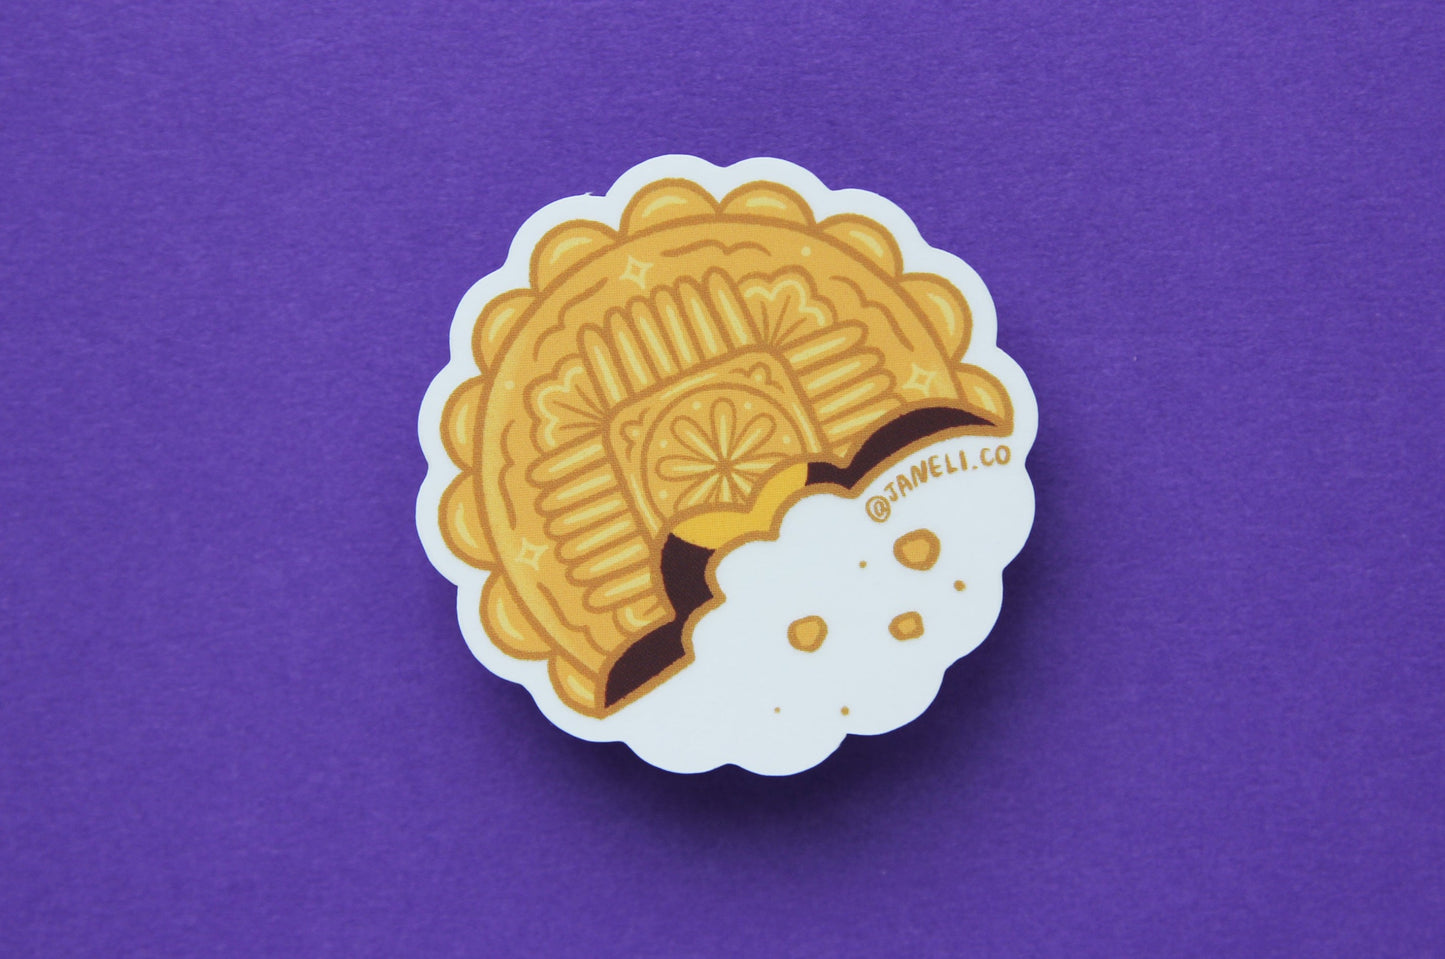 A JaneLi.Co sticker of a mooncake over a purple background. 